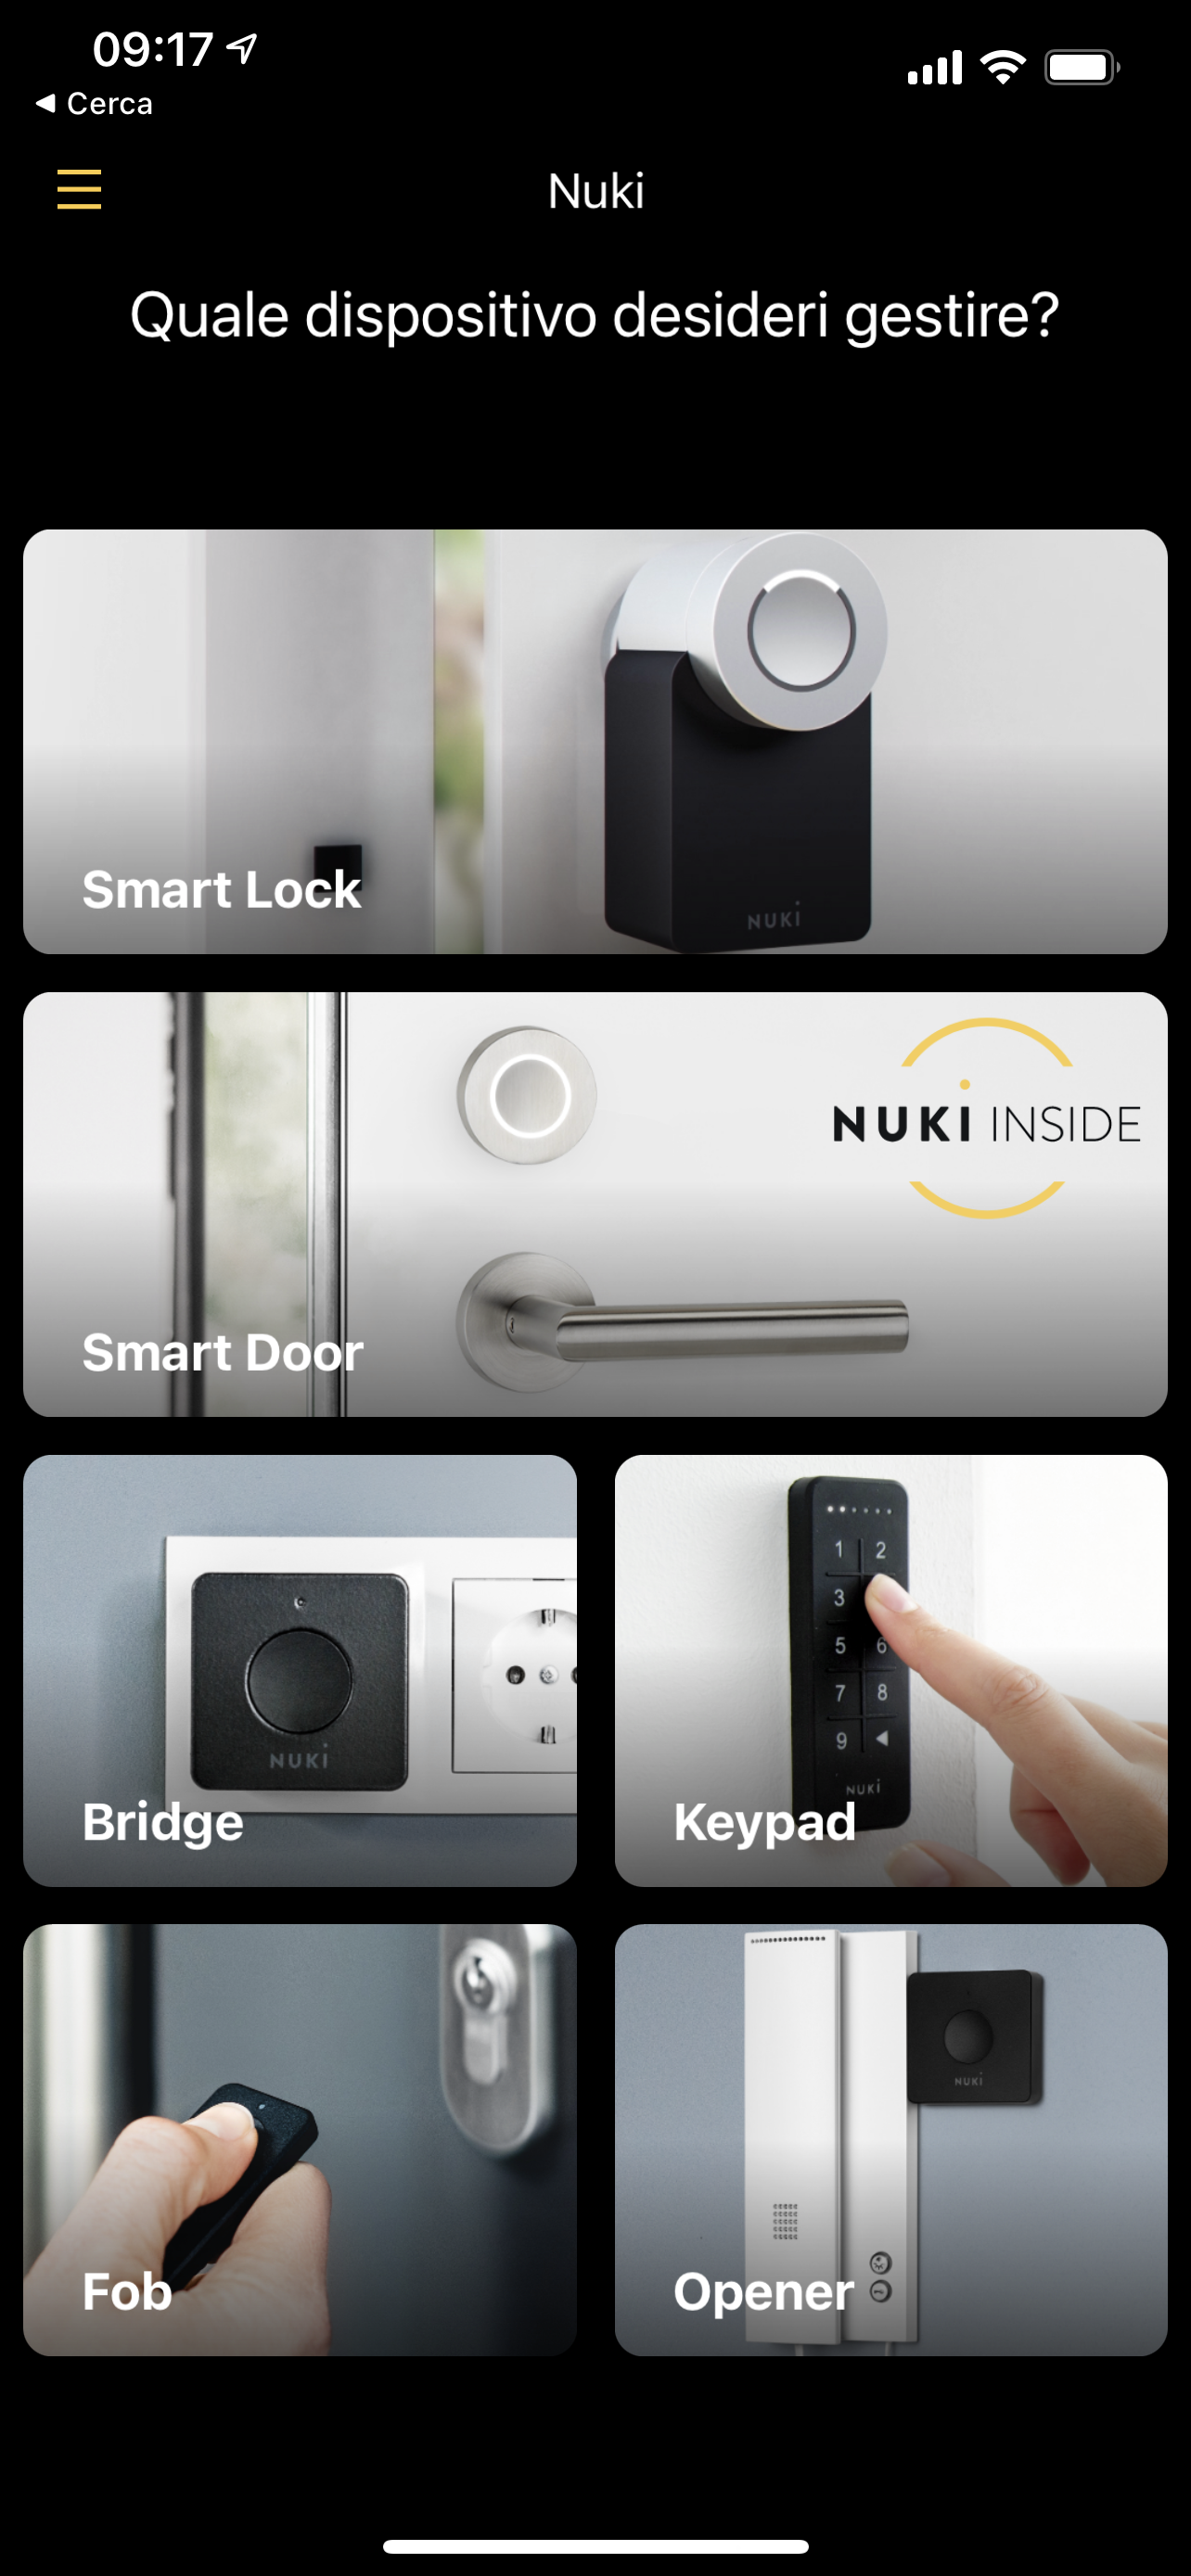 Nuki smart lock review: A simple to use, reliable, and very smart